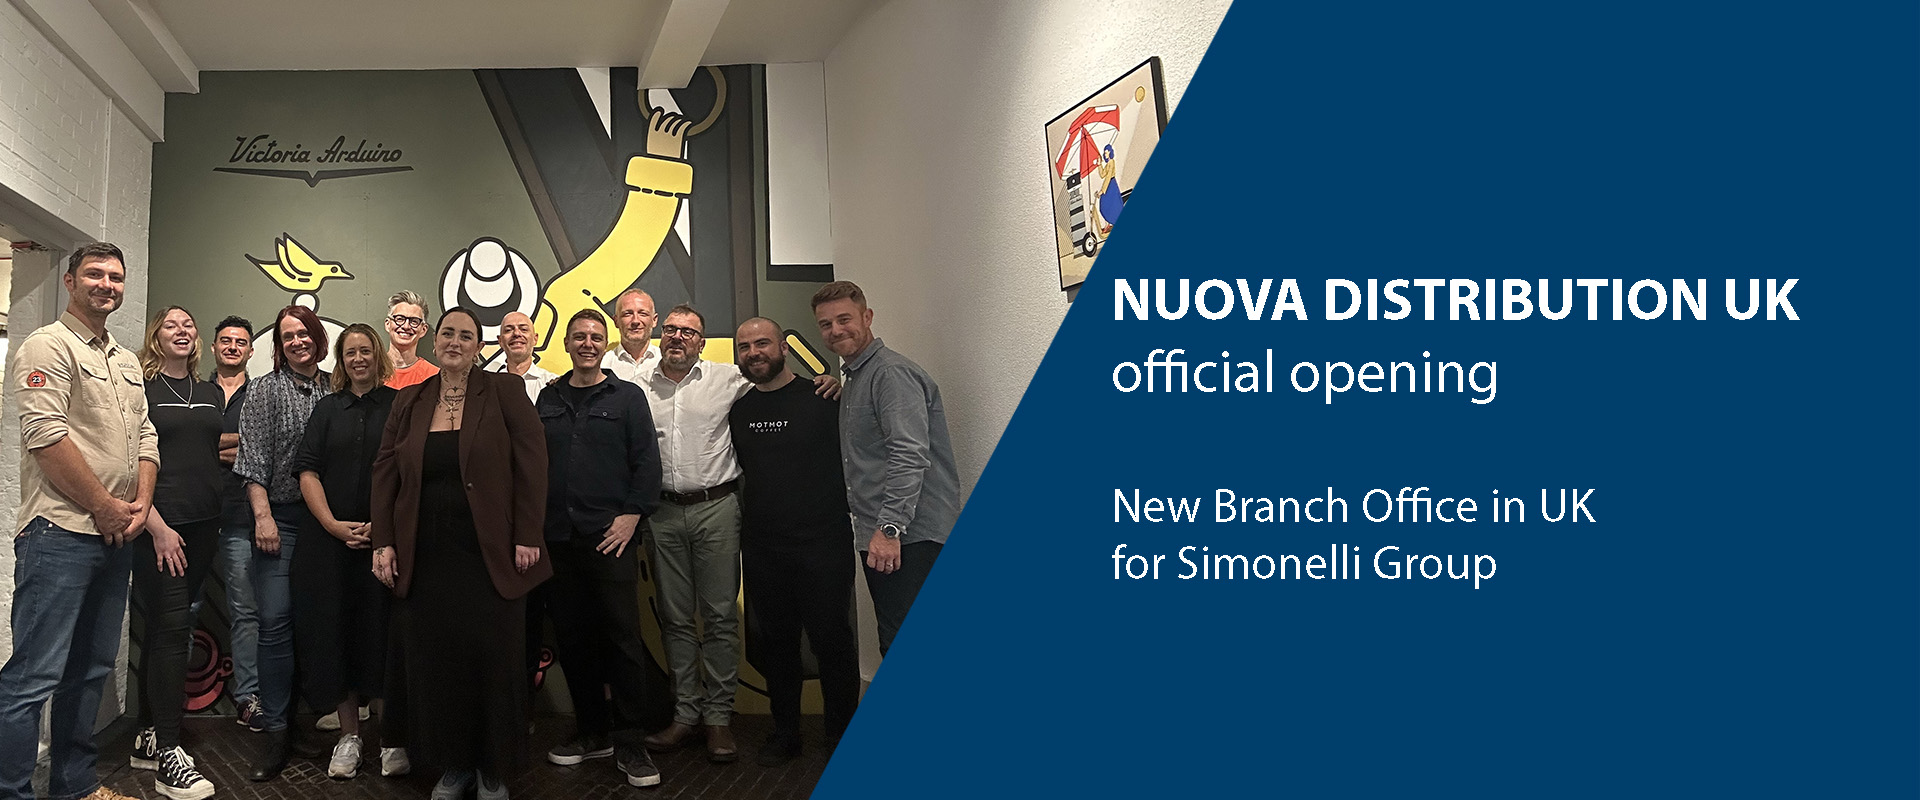 NUOVA DISTRIBUTION UK official opening